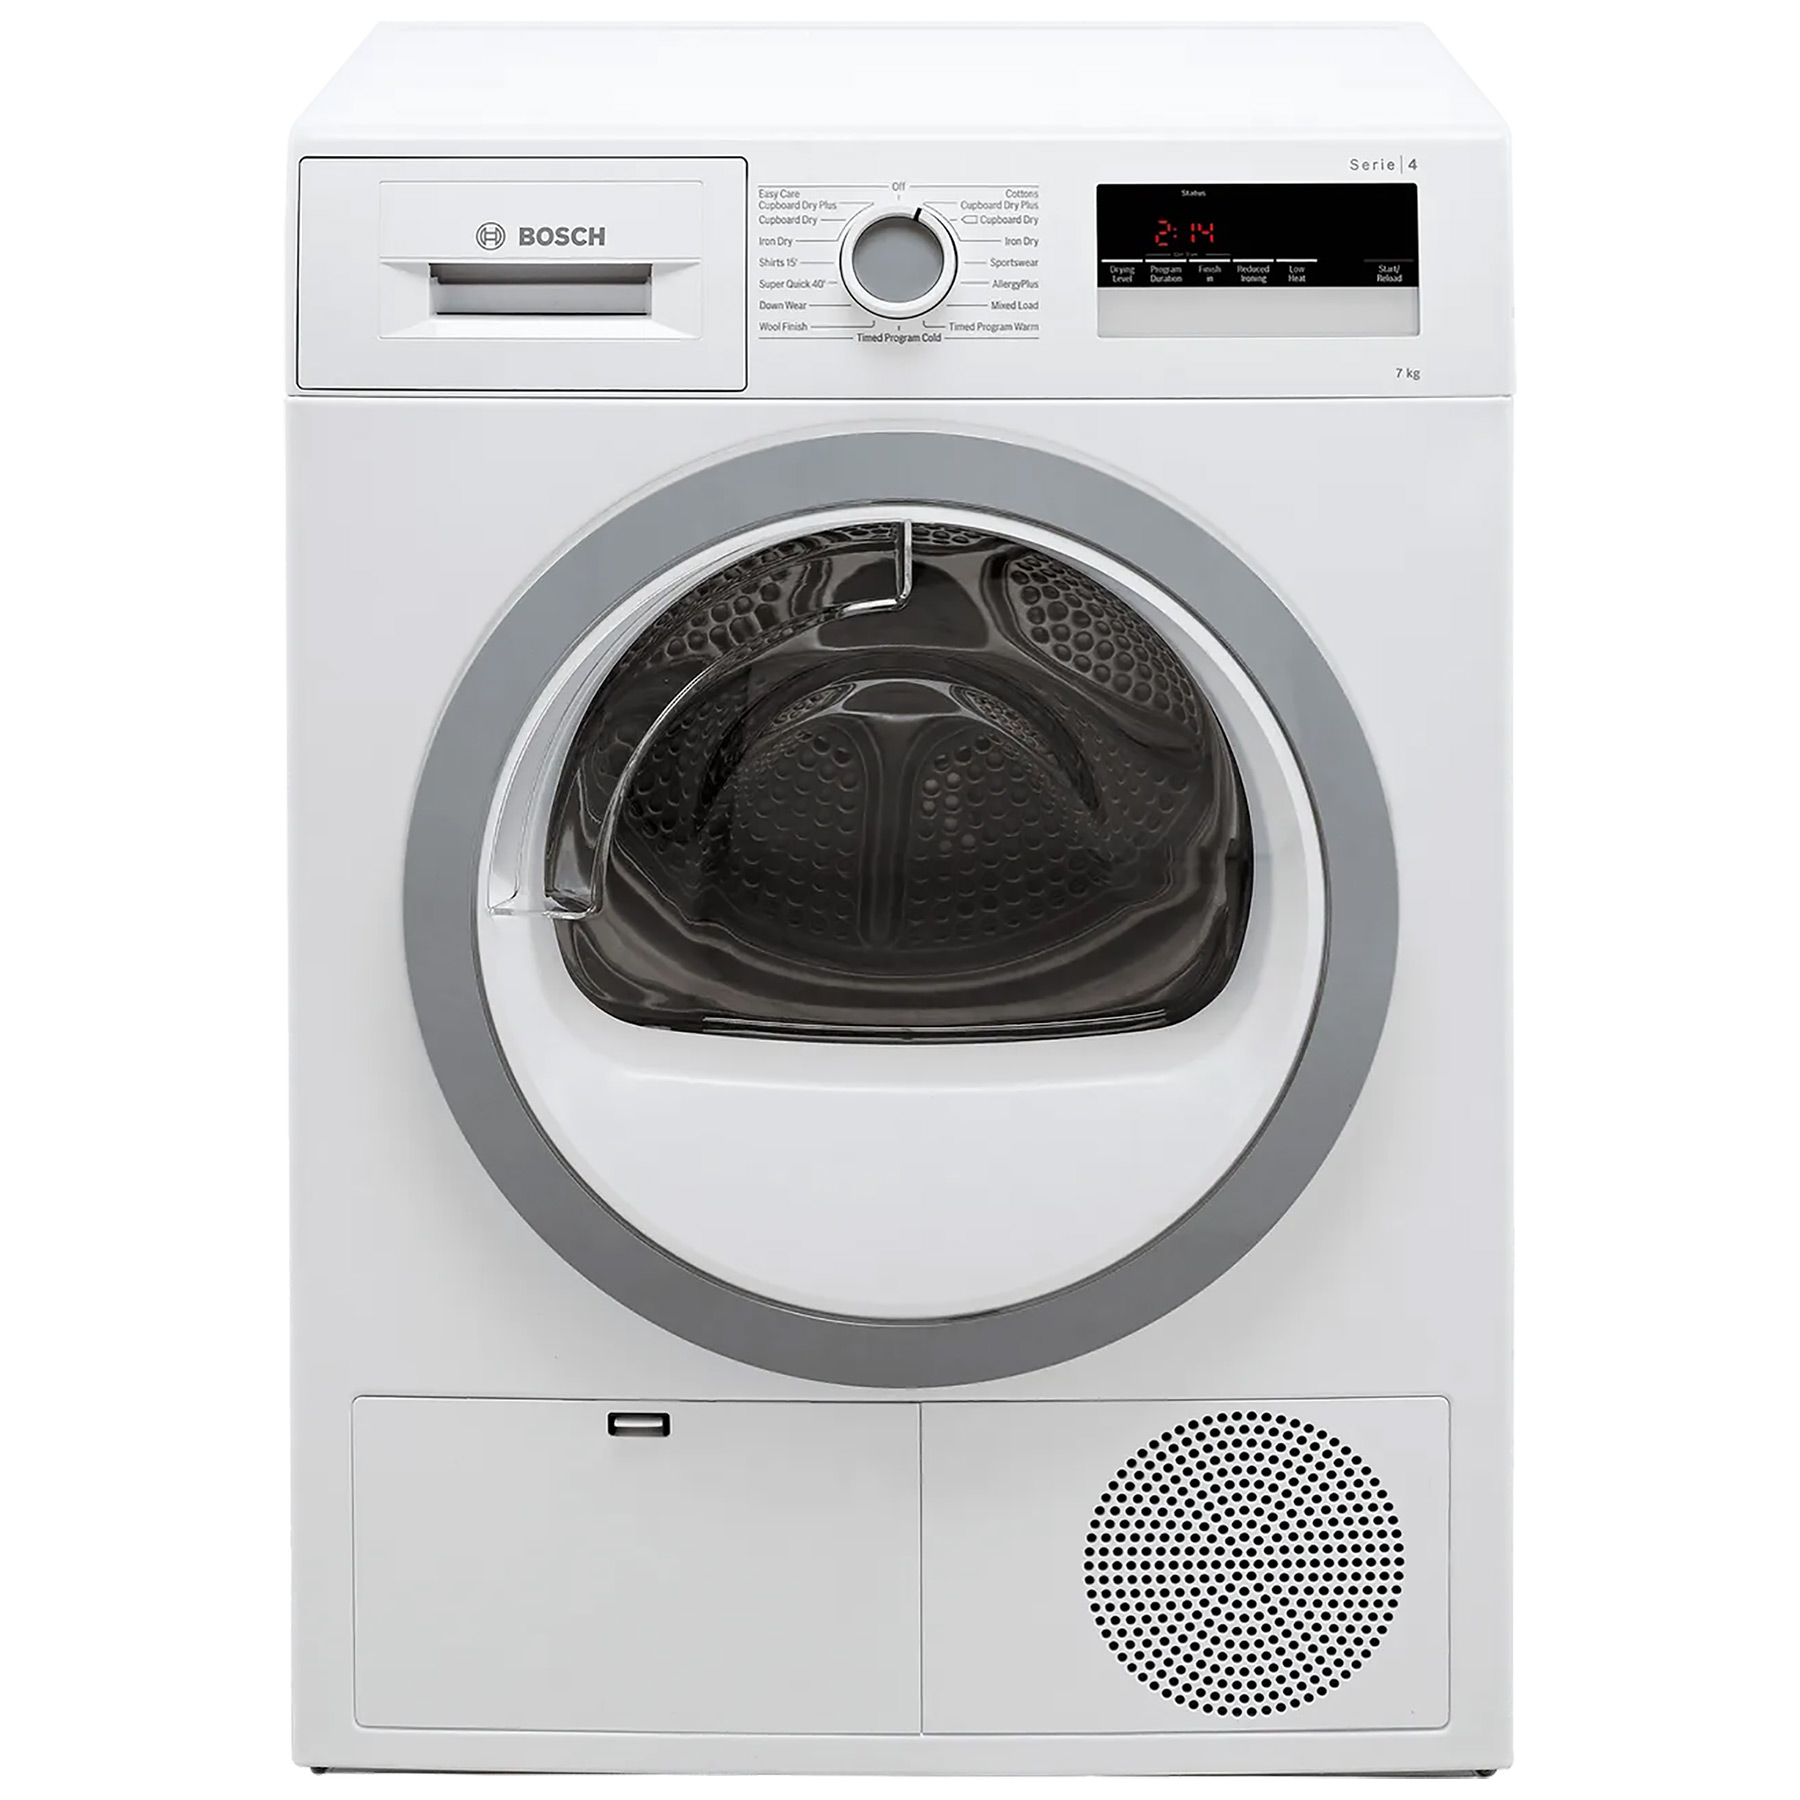 Image of Bosch WTN85201GB Series 4 7kg Condenser Dryer in White B Rated Sensor